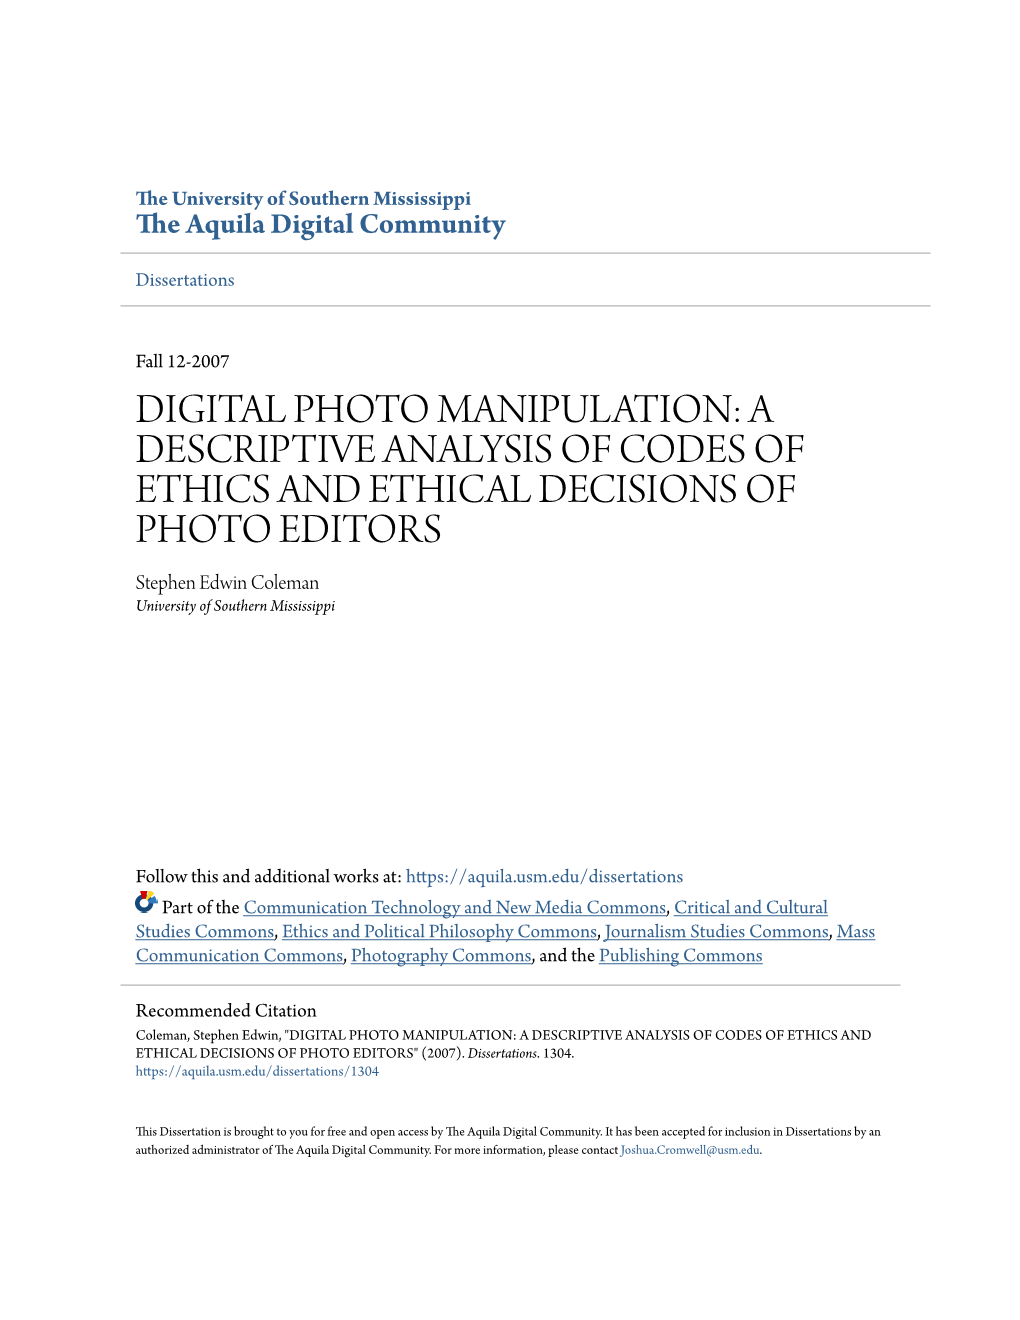 DIGITAL PHOTO MANIPULATION: a DESCRIPTIVE ANALYSIS of CODES of ETHICS and ETHICAL DECISIONS of PHOTO EDITORS Stephen Edwin Coleman University of Southern Mississippi